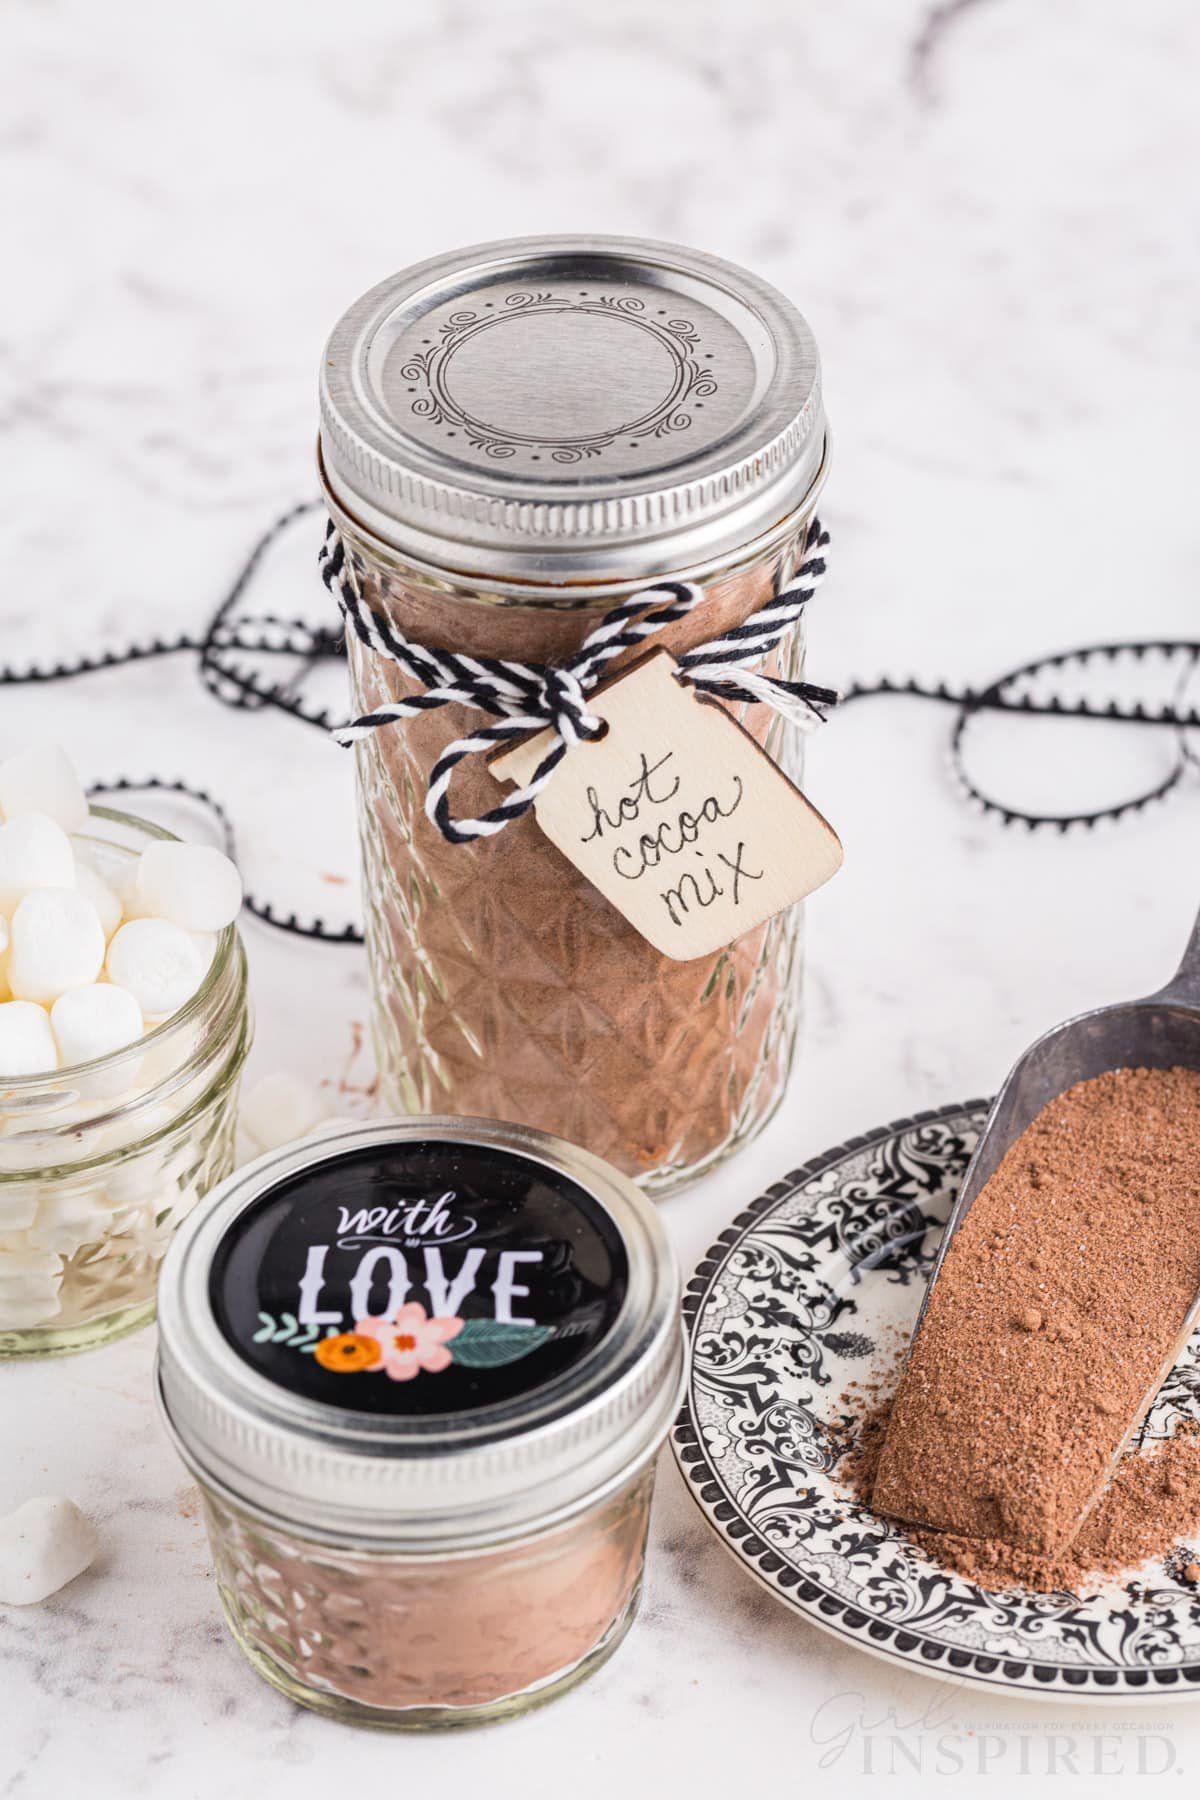 Two glass jars with homemade hot cocoa mix, decorative ribbon, and gift tags, glass jar with mini marshmallows, measuring cup with homemade hot cocoa mix, on a marble countertop.